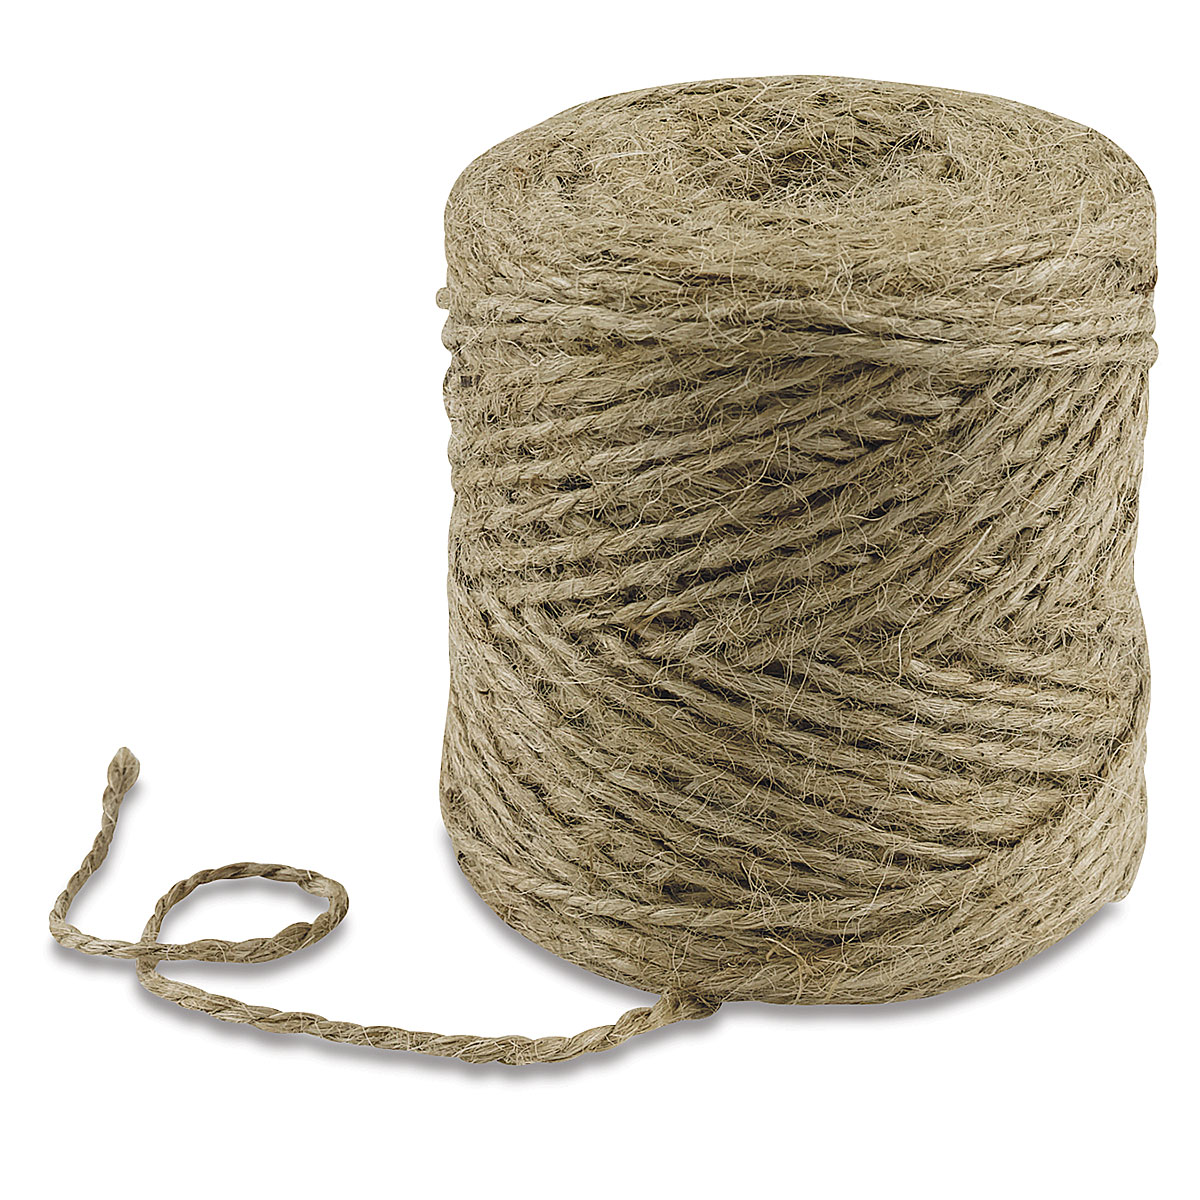 5 Ply Jute Twine Extra Large 10lbs Bulk Roll for Crafting